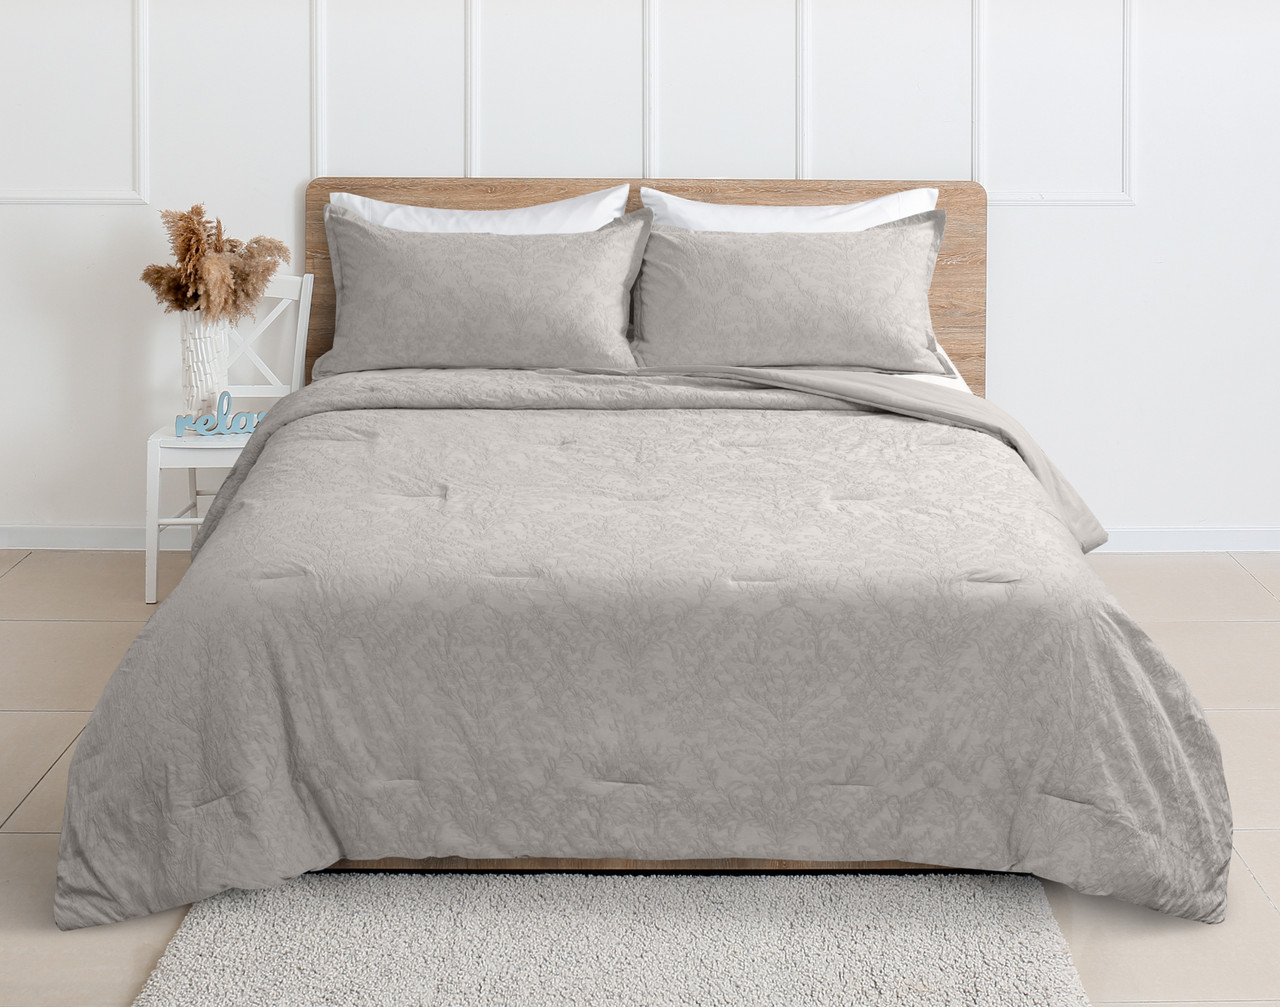 Front view of our Cortina Cotton Matelassé Comforter Set in Sand dressed over a queen bed in a clean white bedroom.